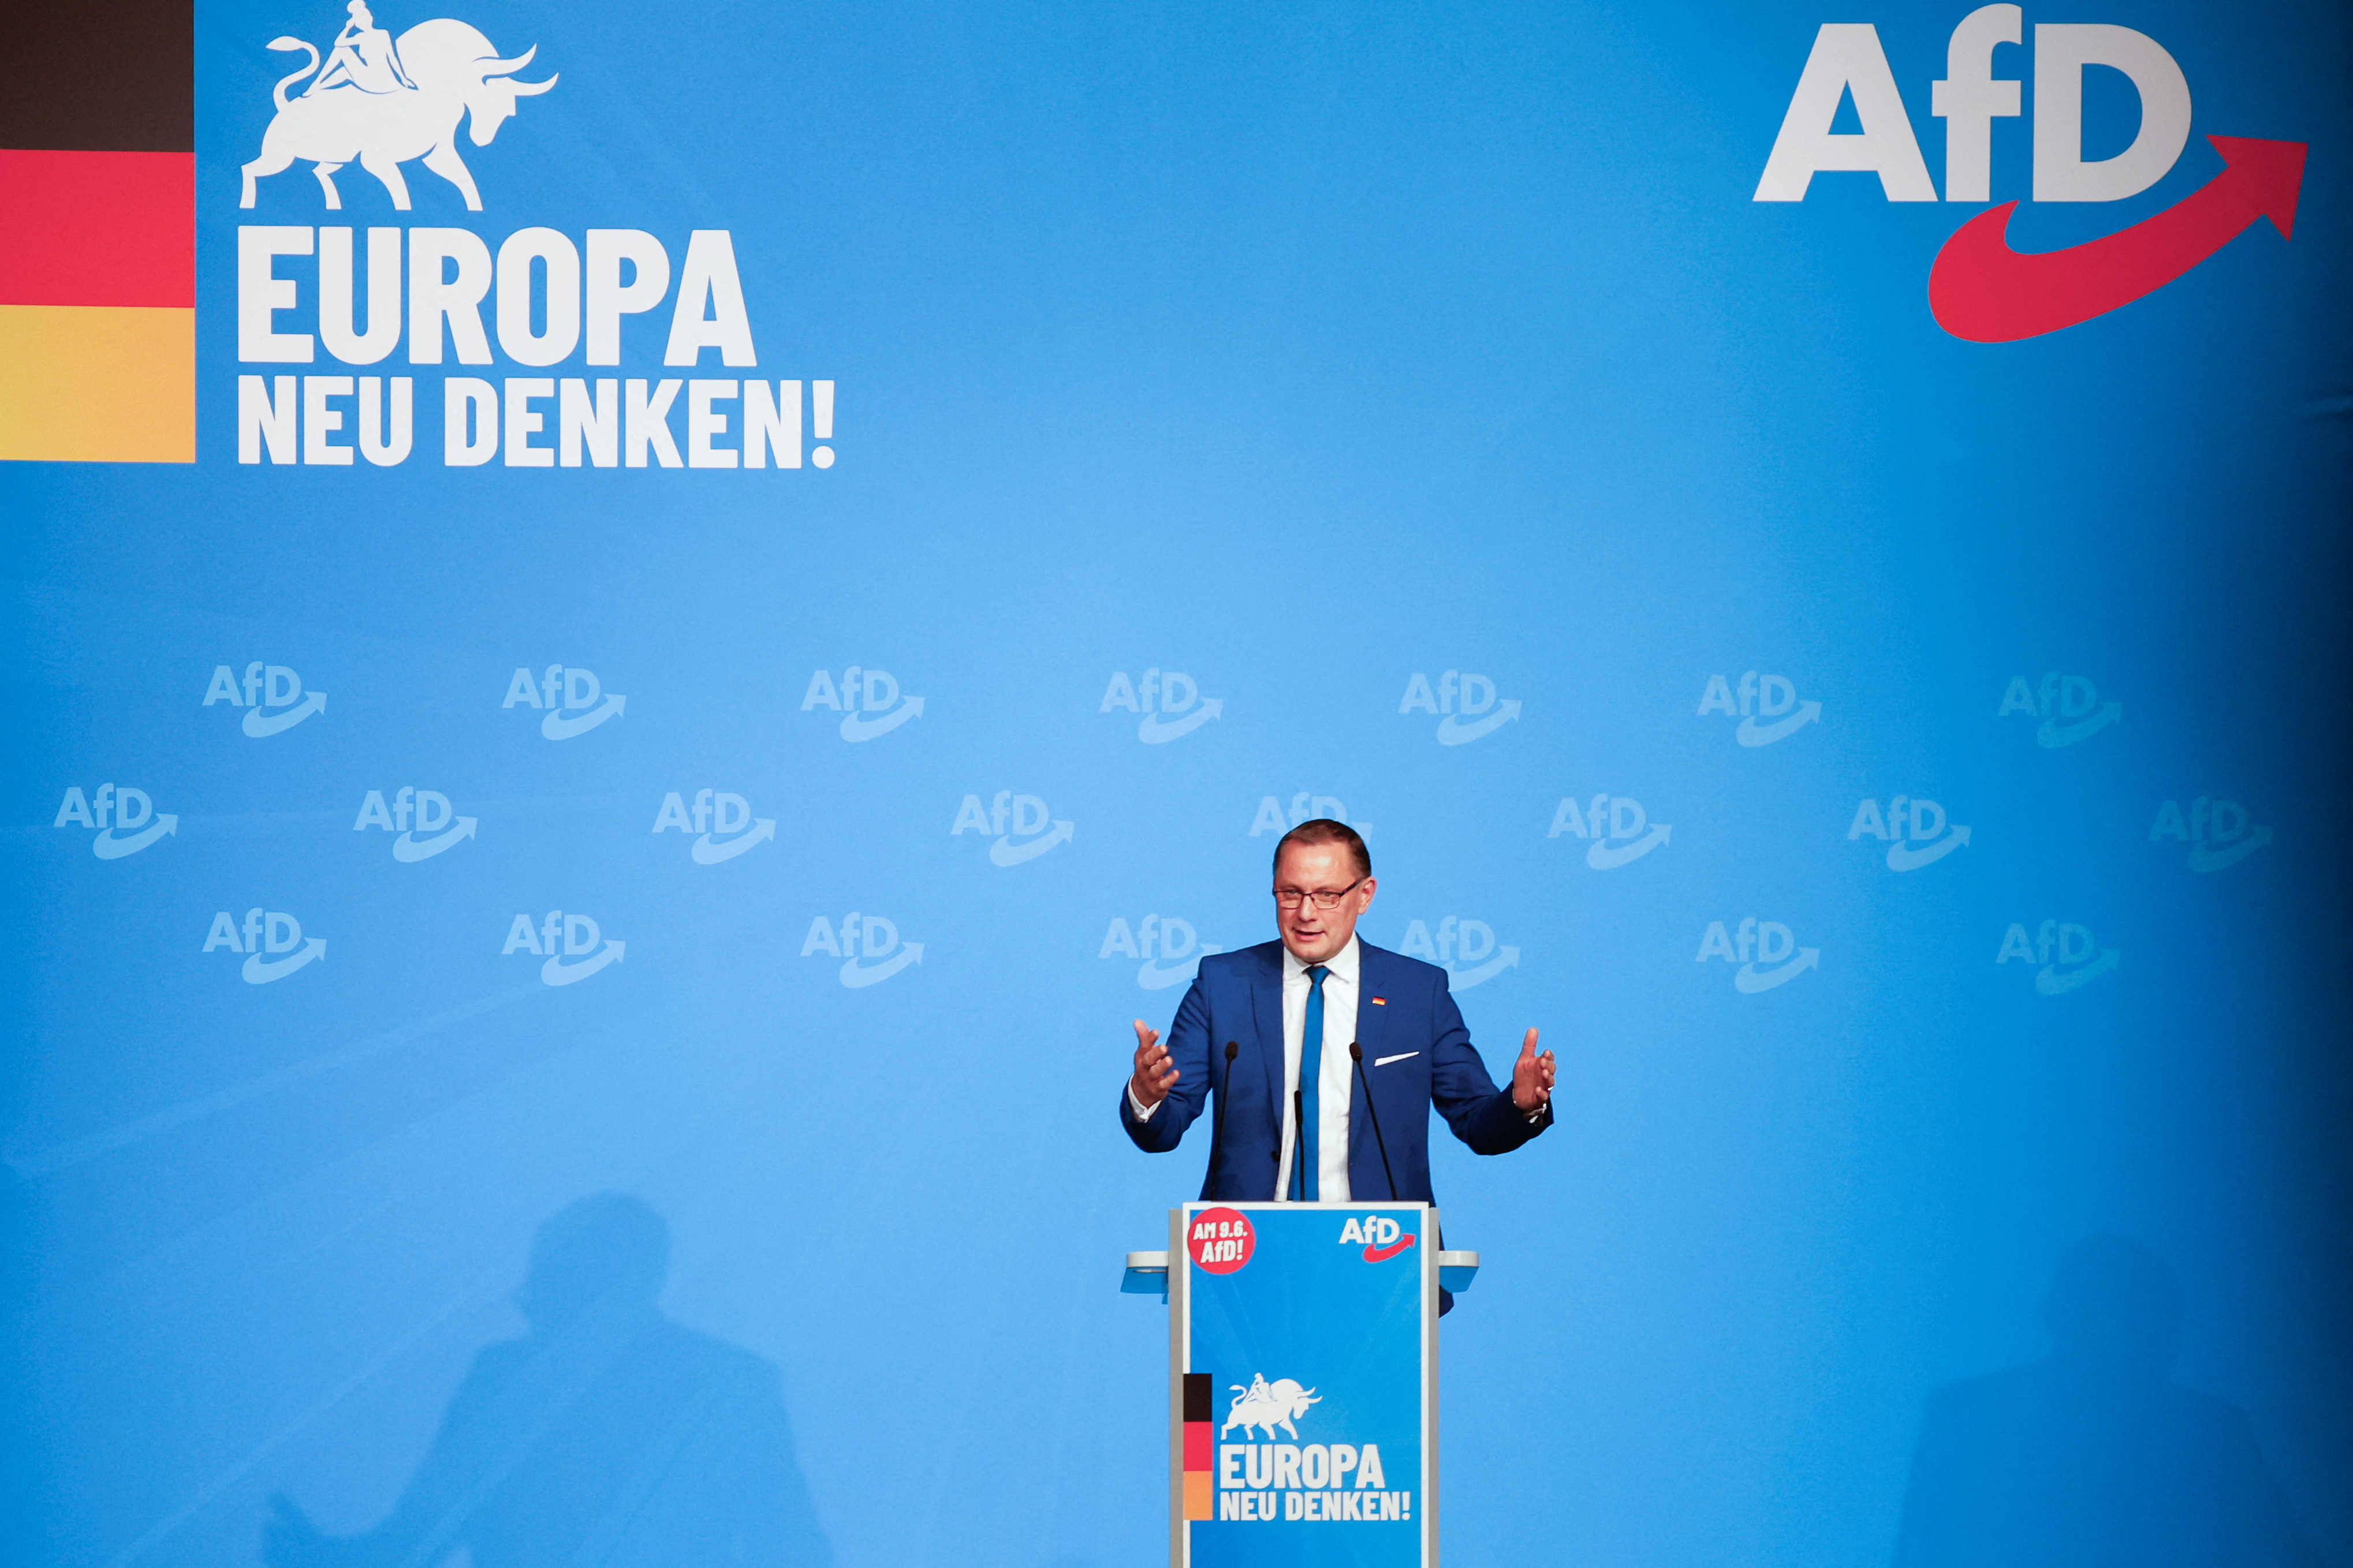 AfD party launches its campaign in Donaueschingen